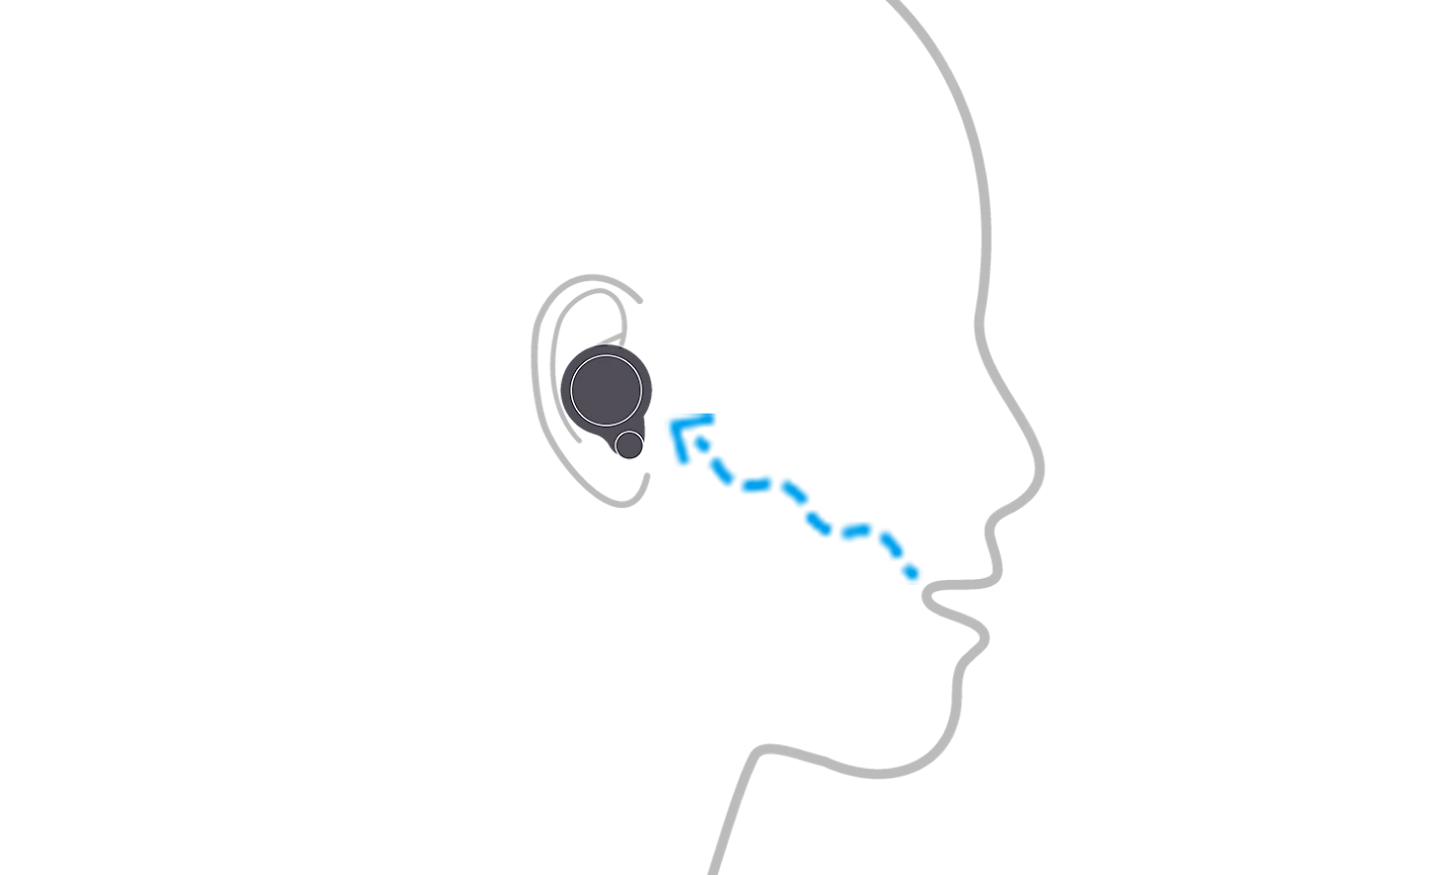 Illustration of a person wearing WF-1000XM4 headphones showing how the bone-conduction sensor detects speech vibrationsIllustration of a person wearing WF-1000XM4 headphones showing how the bone-conduction sensor detects speech vibrations